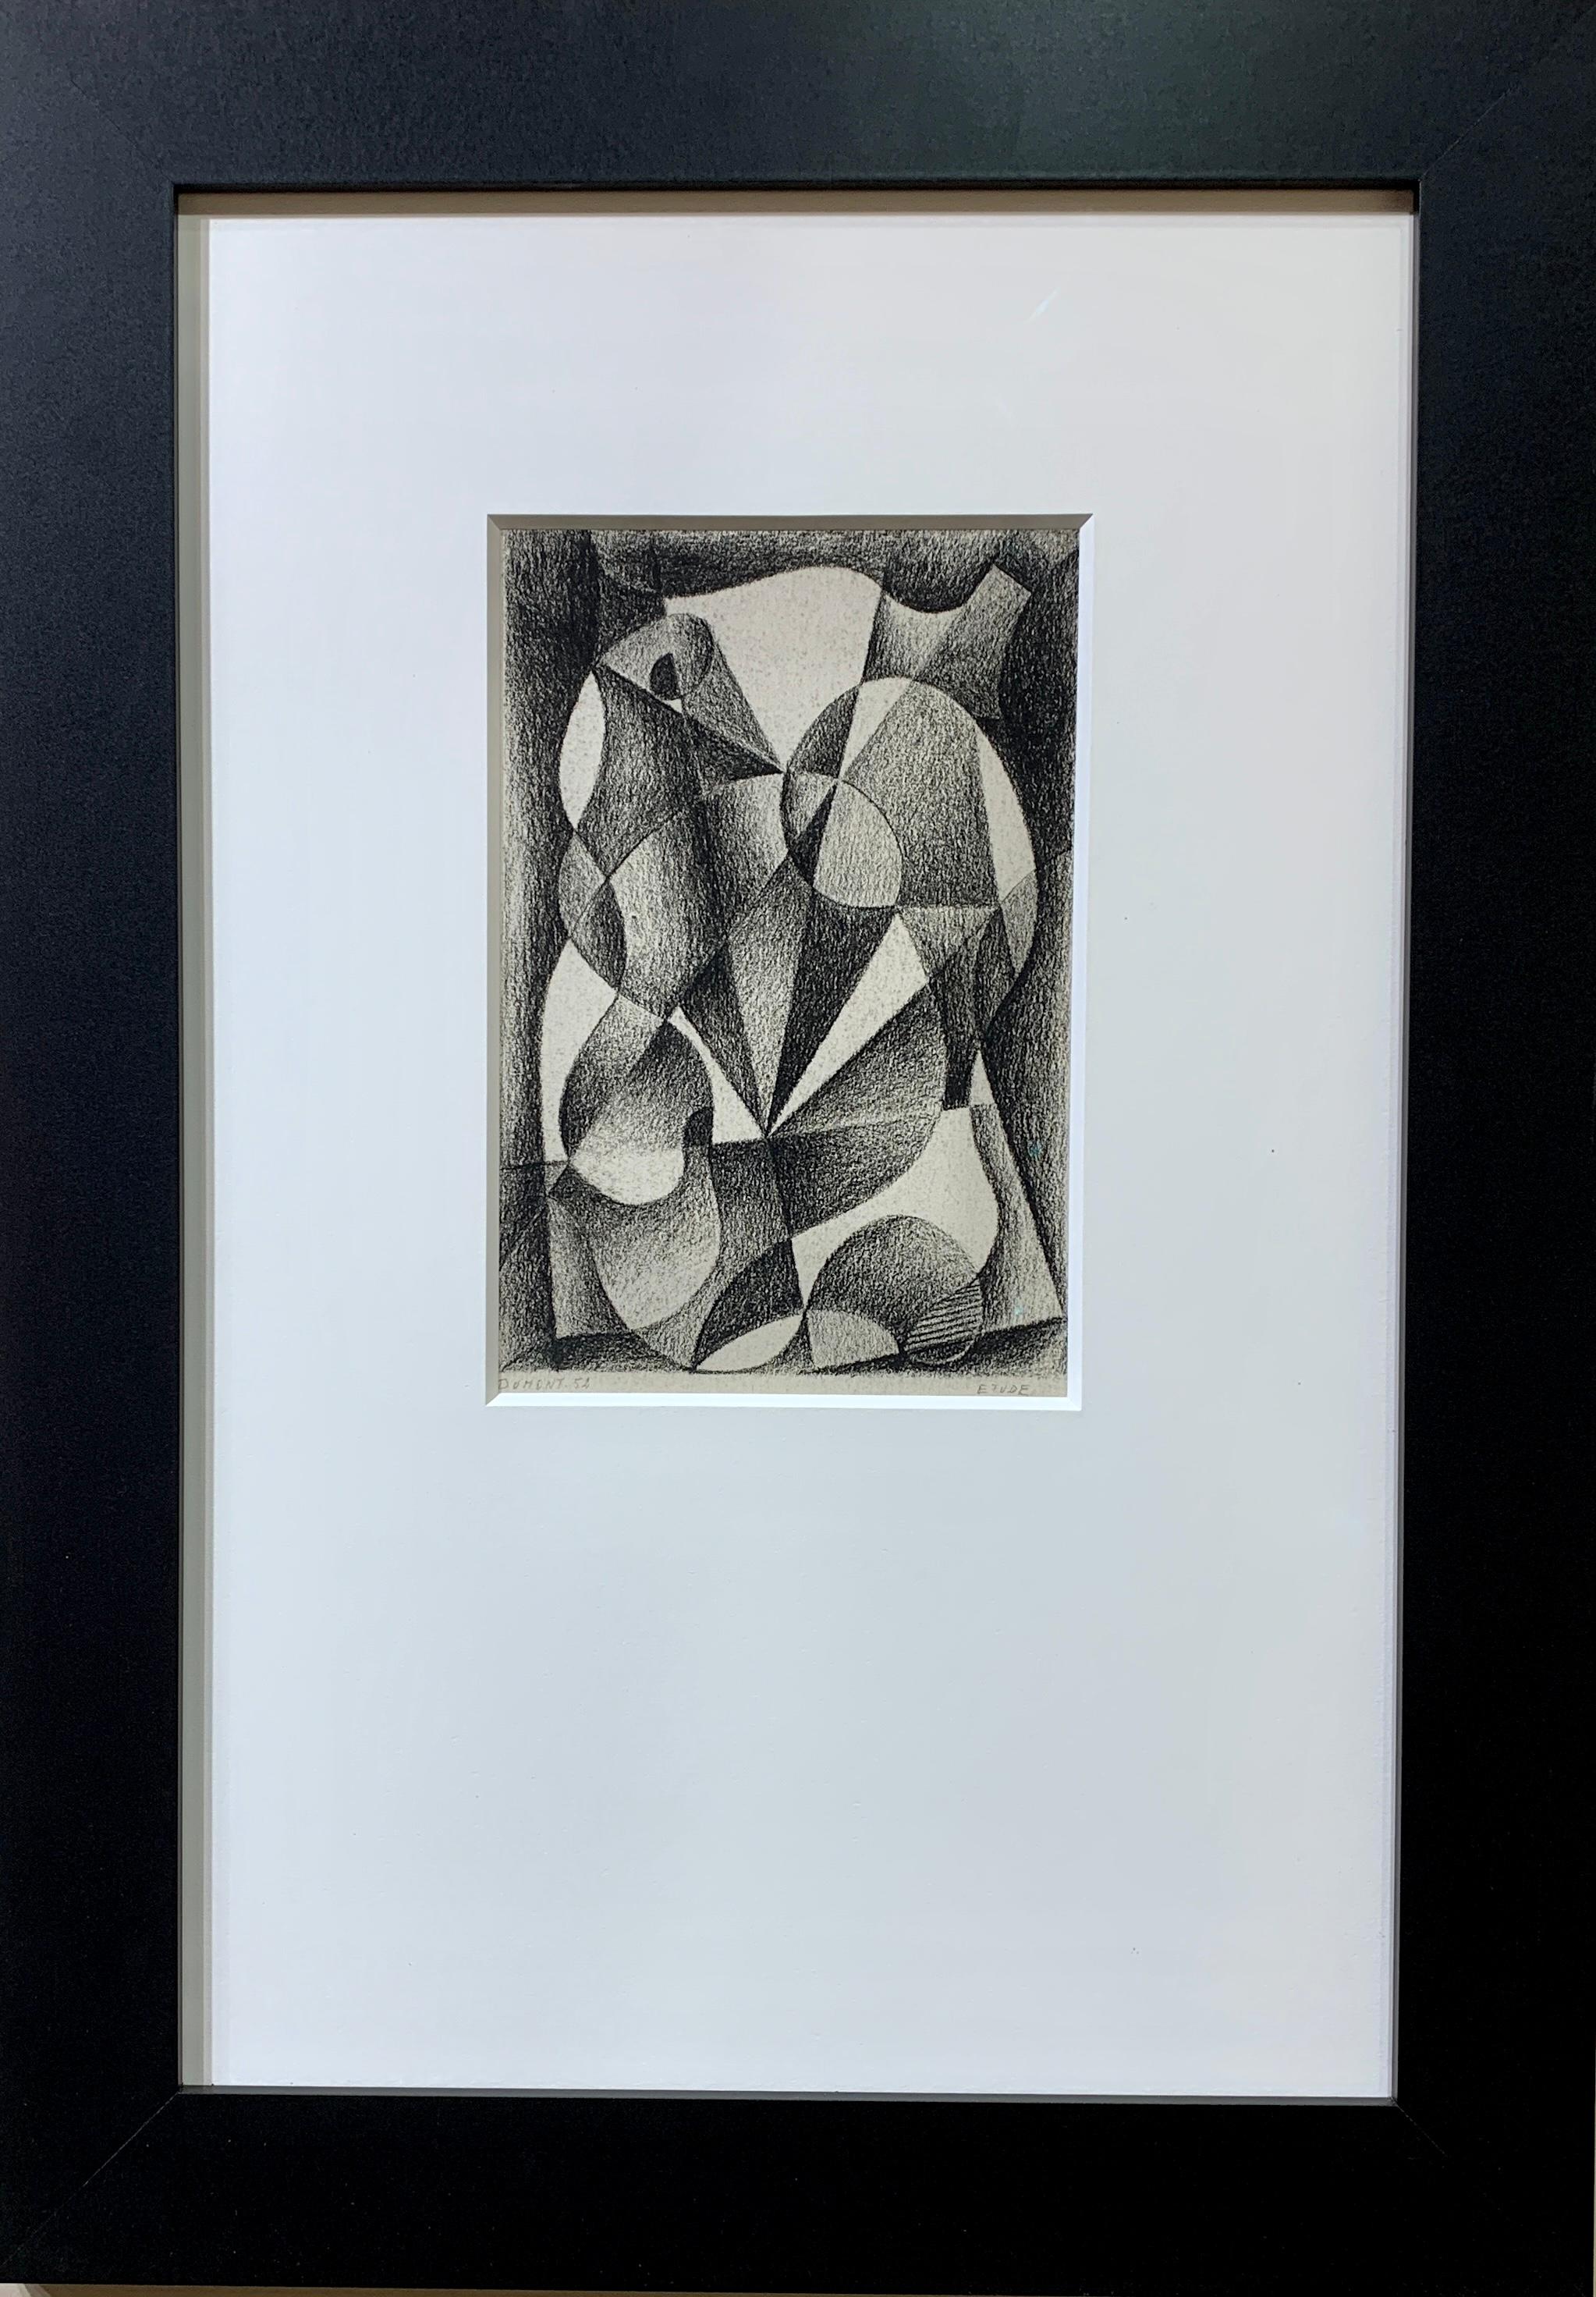 Marcel Dumont Abstract Drawing - 20th century Belgium, Black and White Abstract pencil drawing, Etude